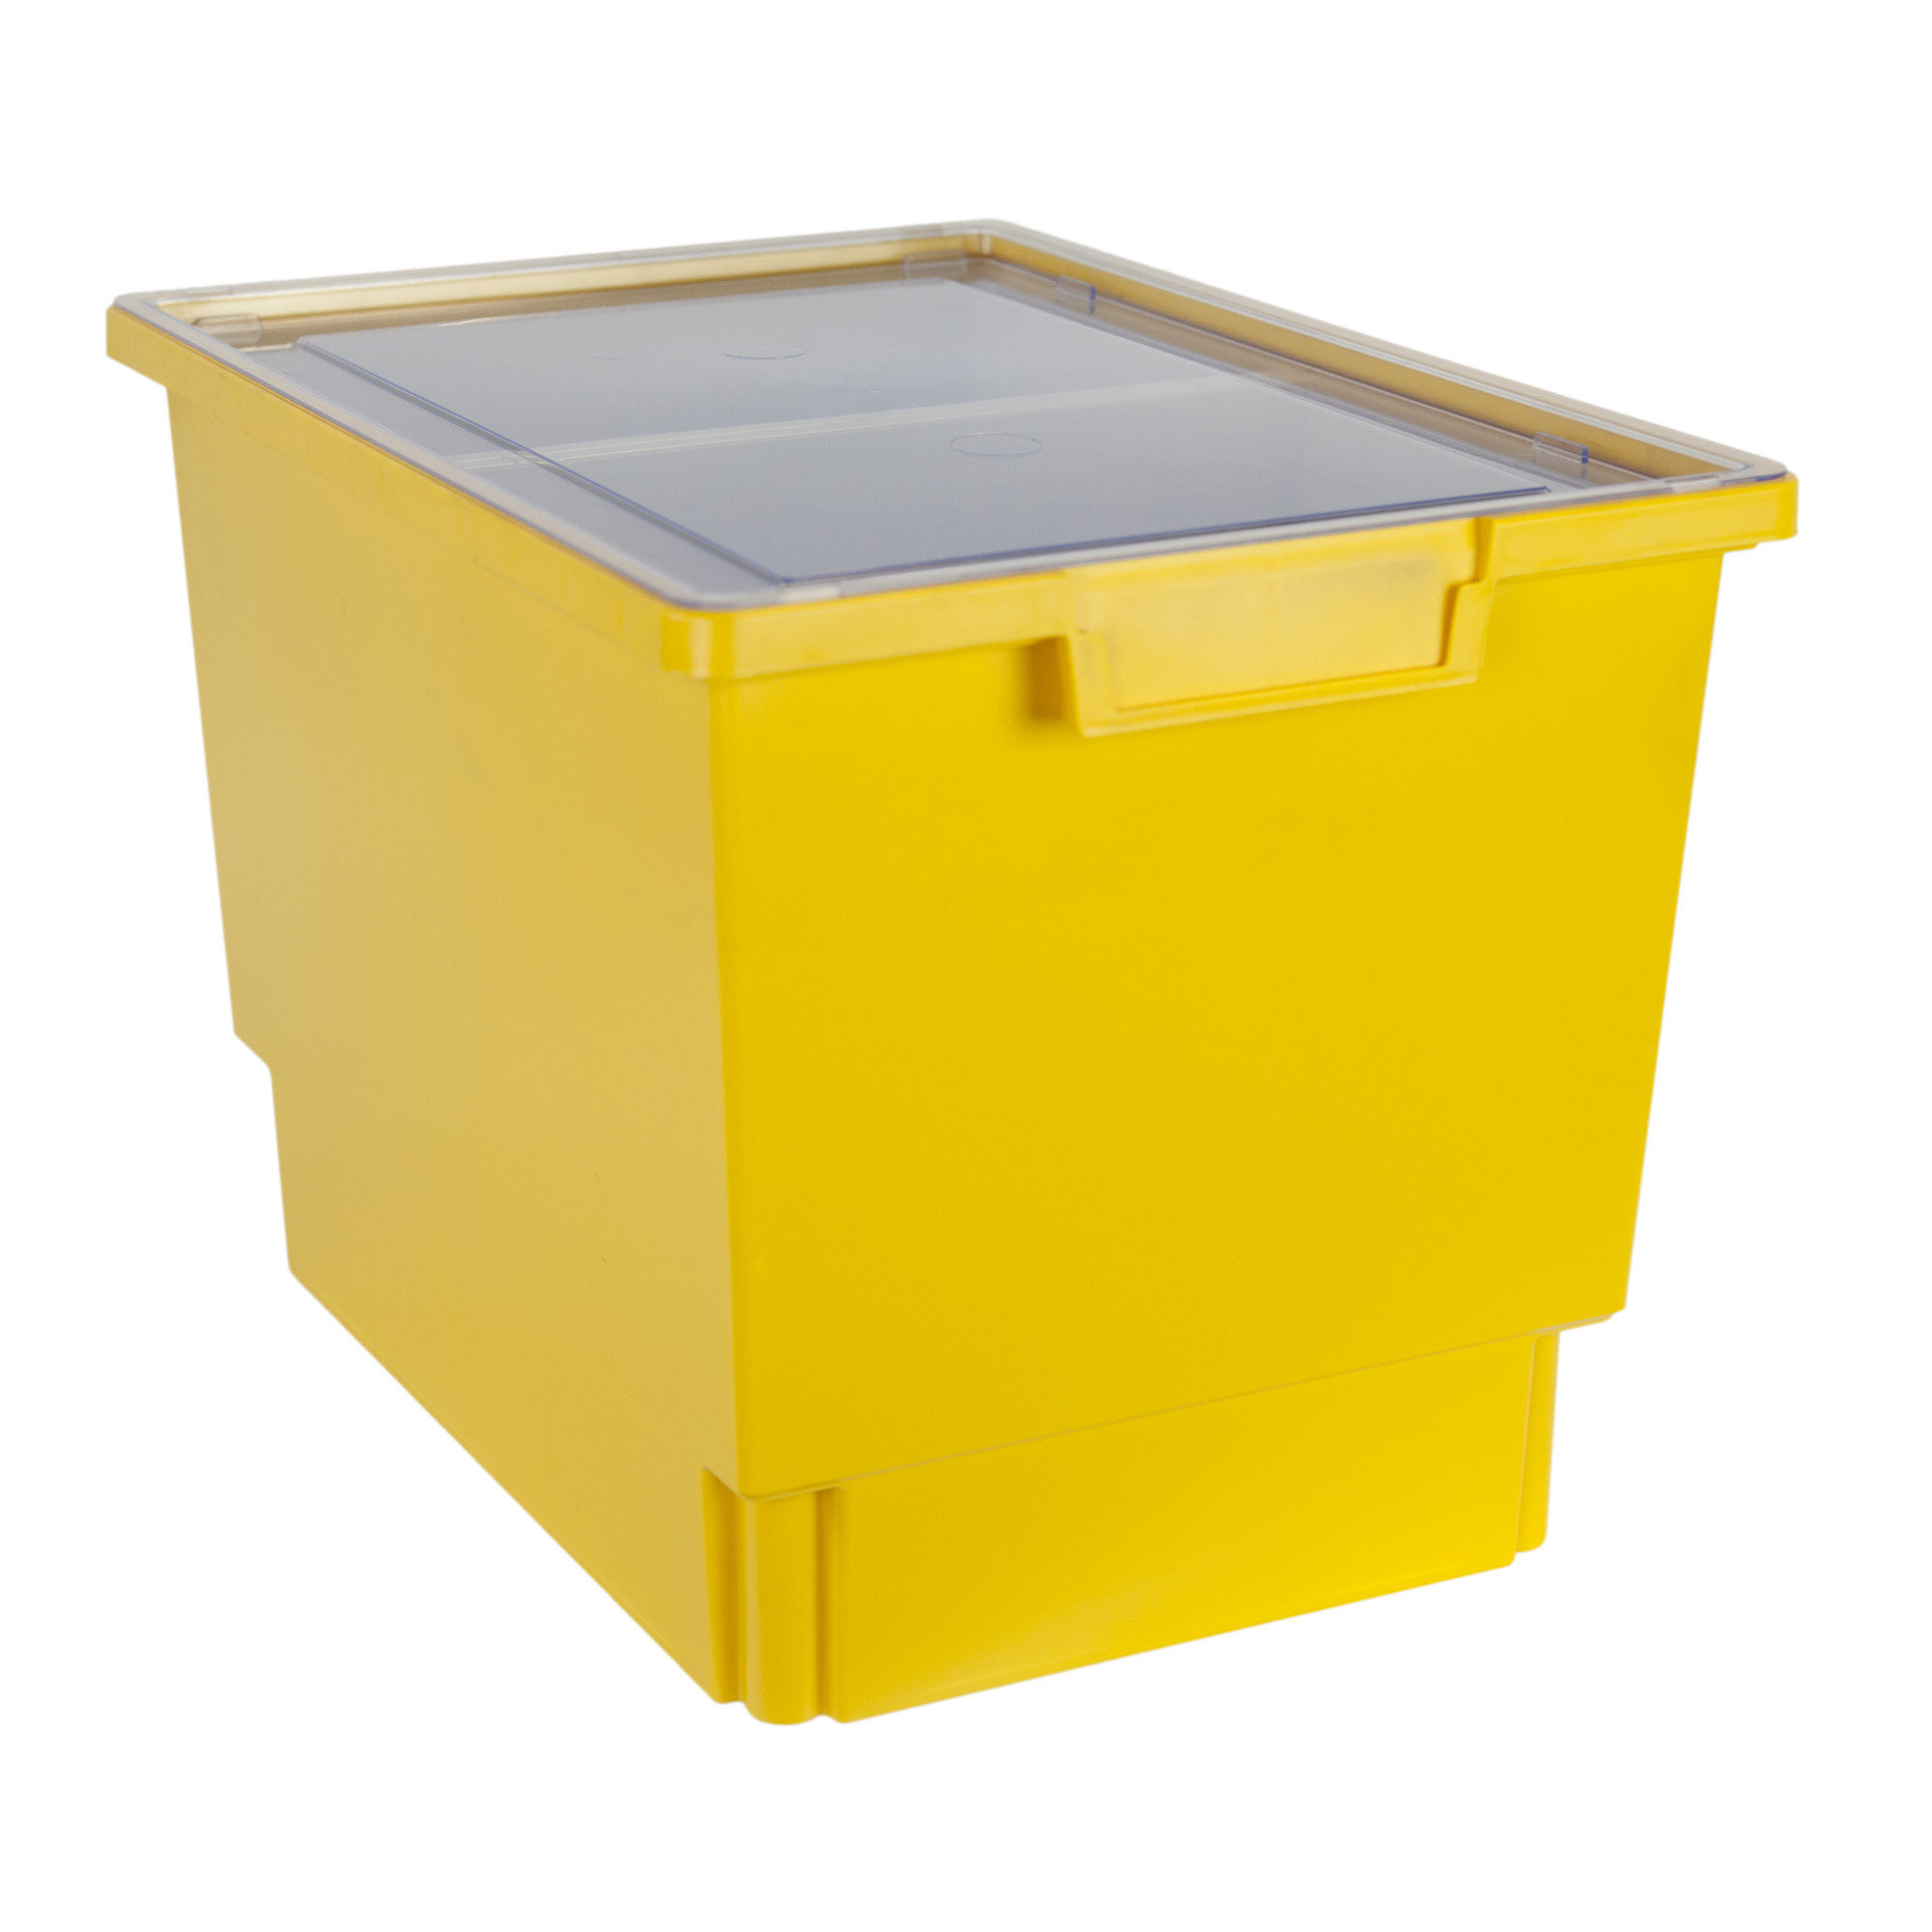 Certwood StorWerks, Slim Line 12Inch Tray Kit (2 x Divisions) Yellow, Included (qty.) 1, Material Plastic, Height 12 in, Model CE1954PY-NK0404-1